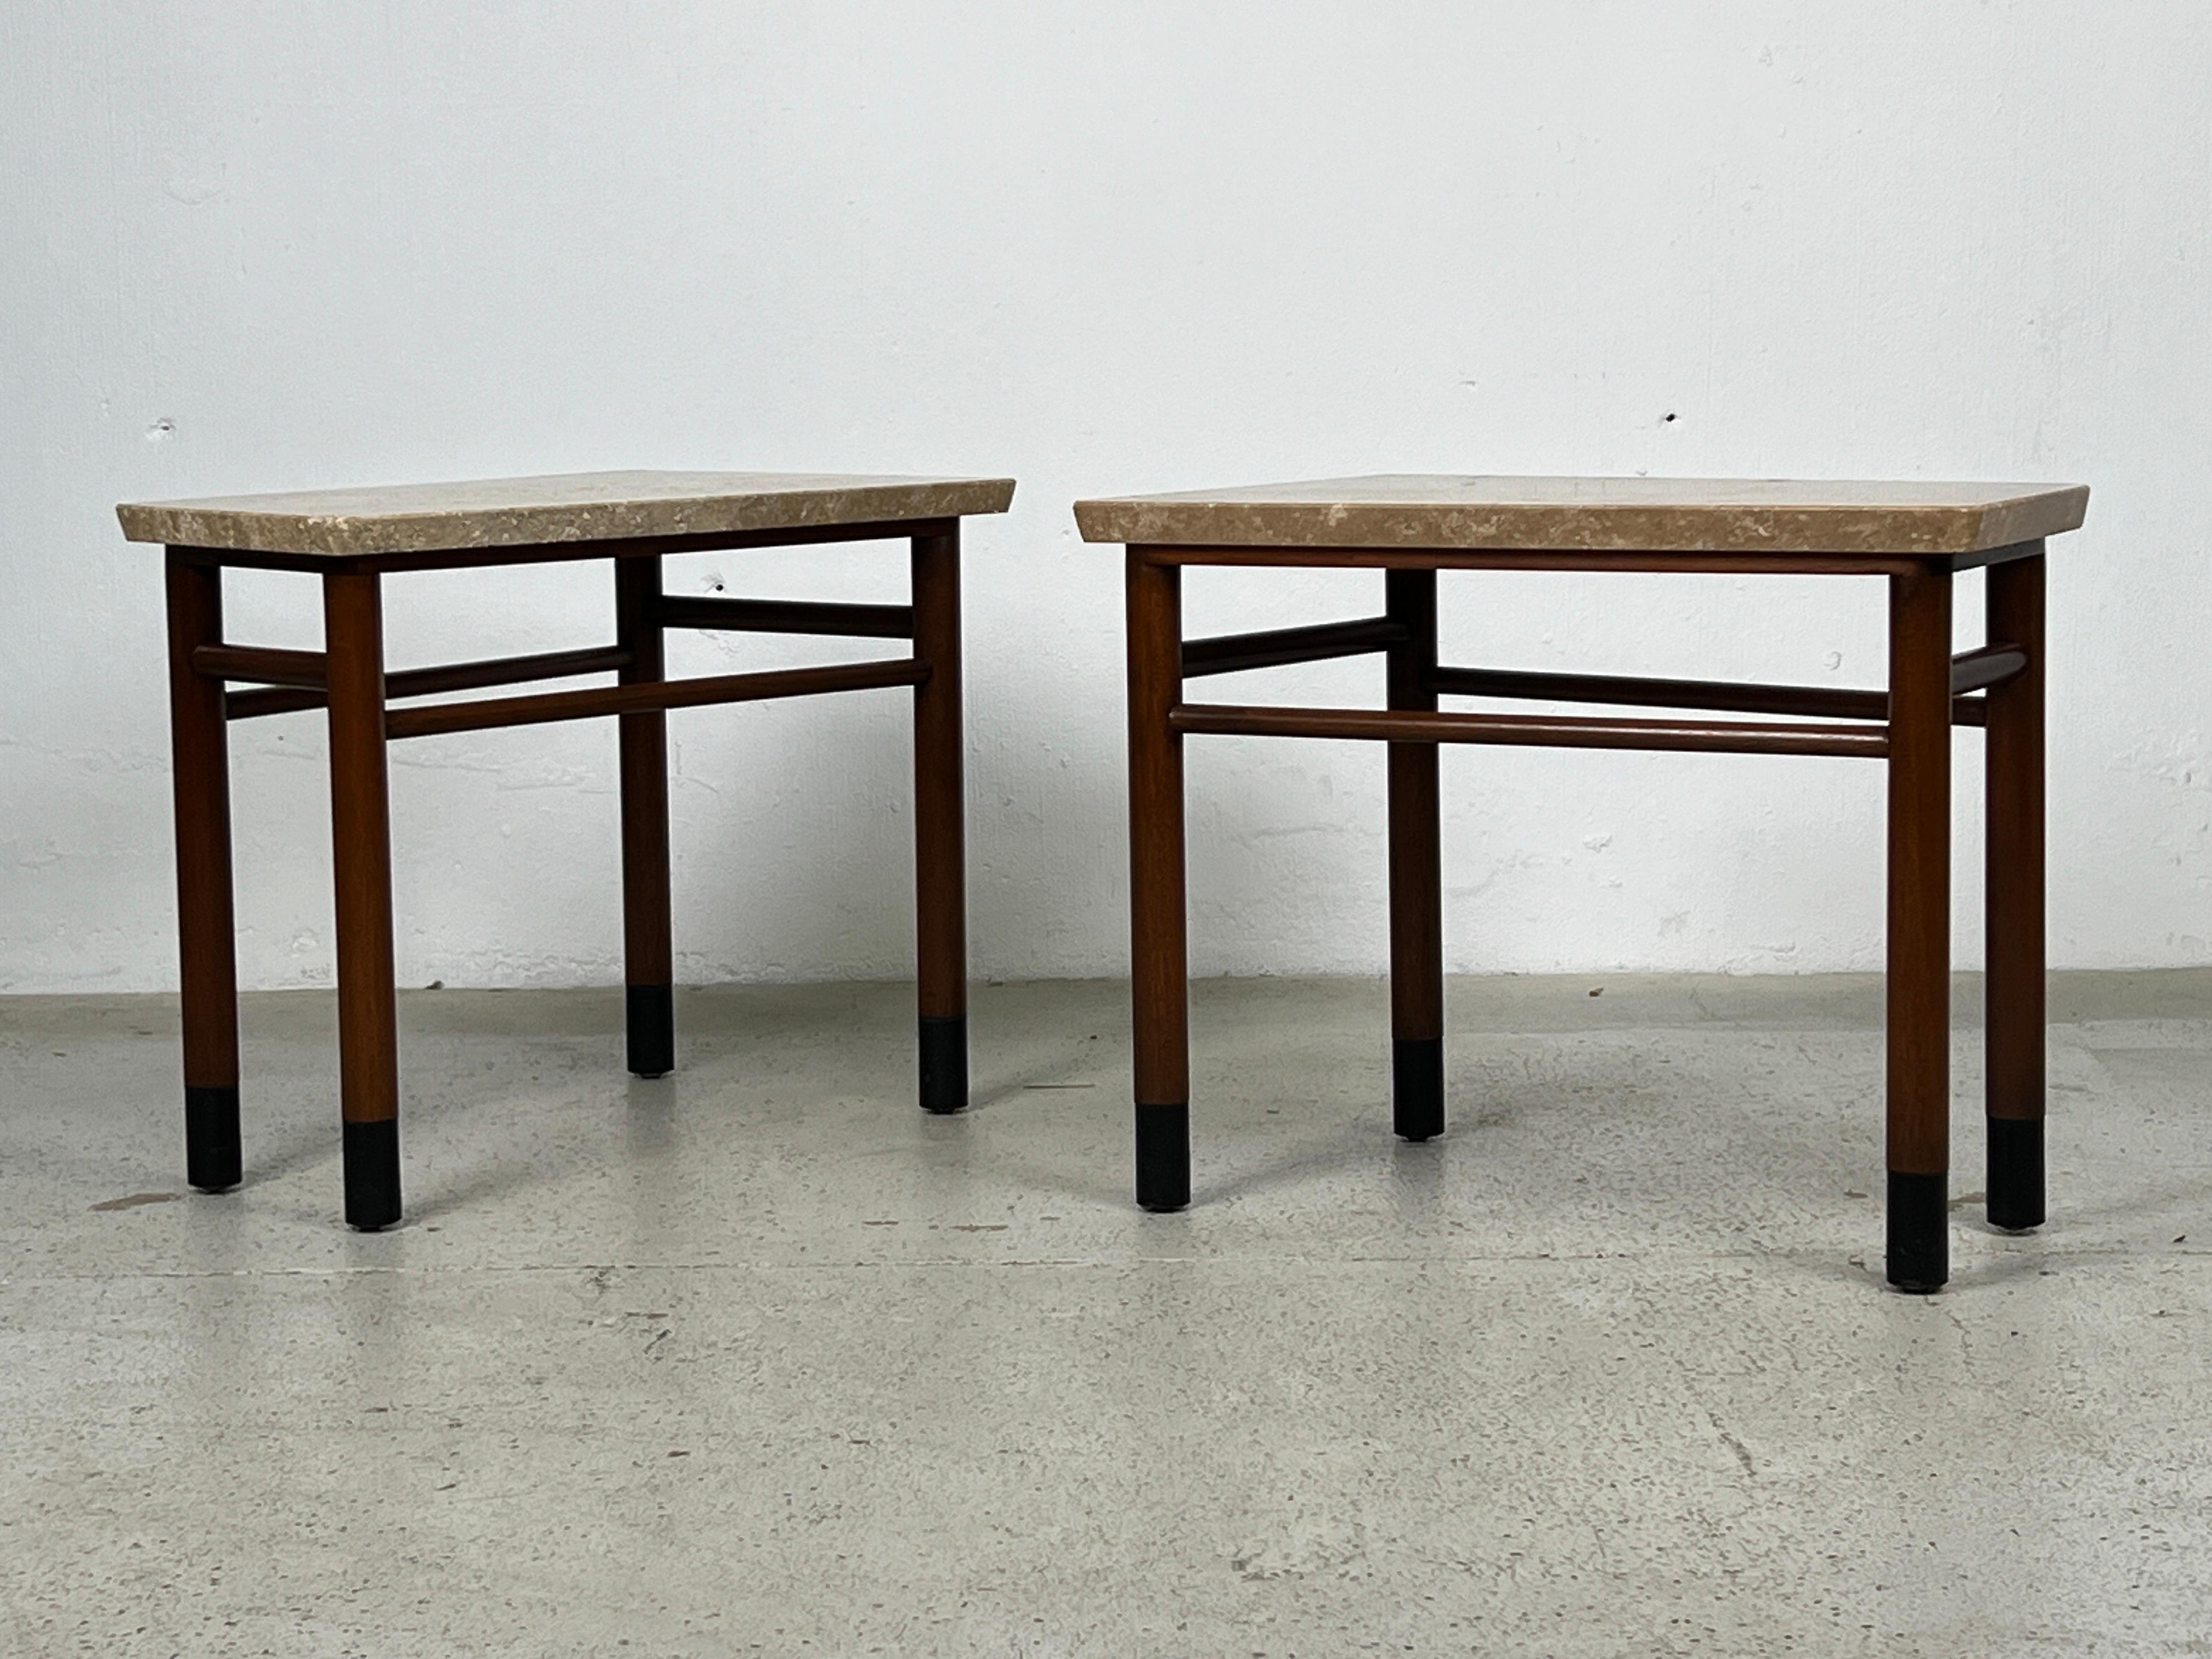 A pair of wedge shaped travertine top tables with mahogany bases and leather wrapped feet. Designed by Edward Wormley for Dunbar. 